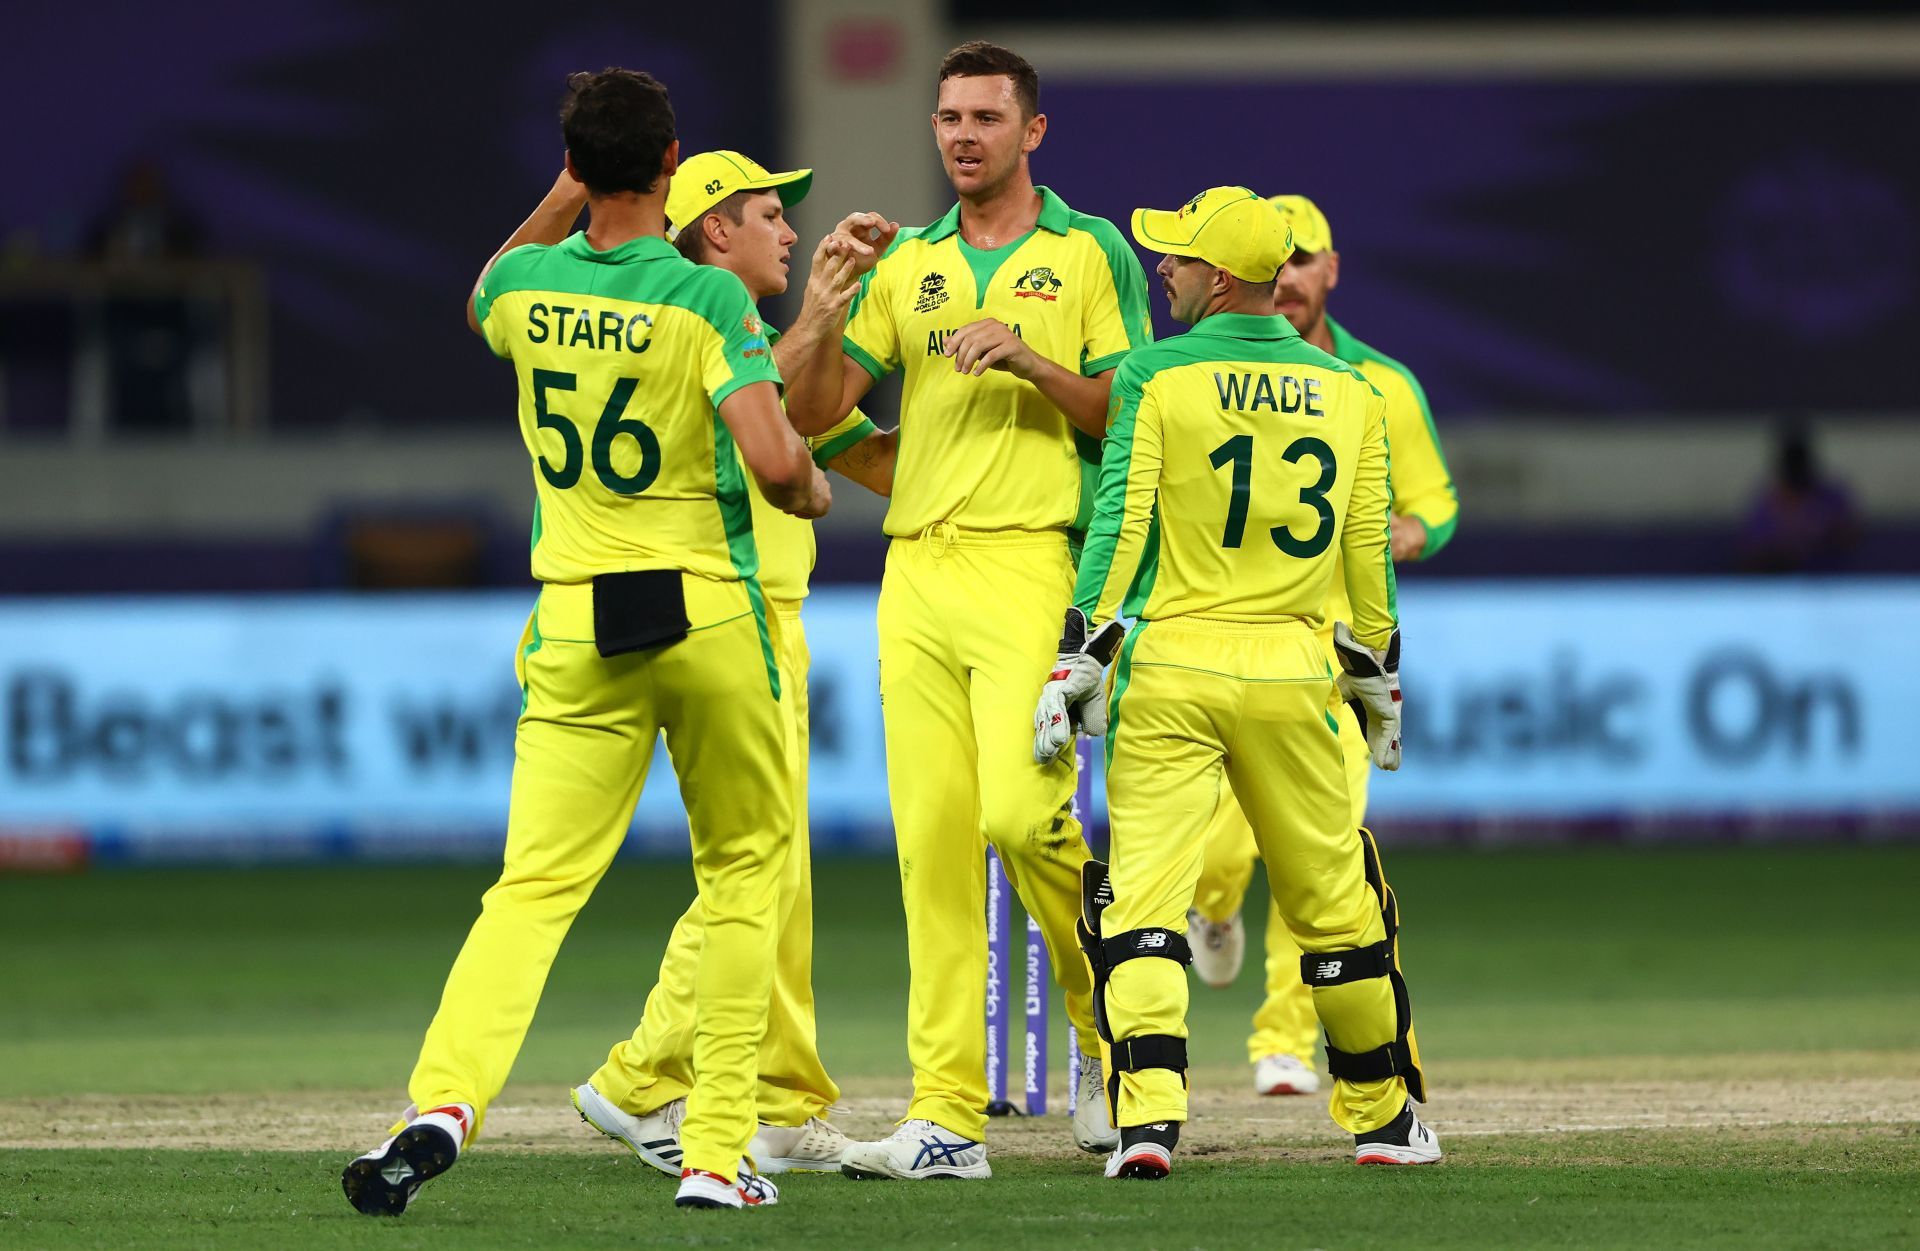 Australia clinched their maiden T20 World Cup